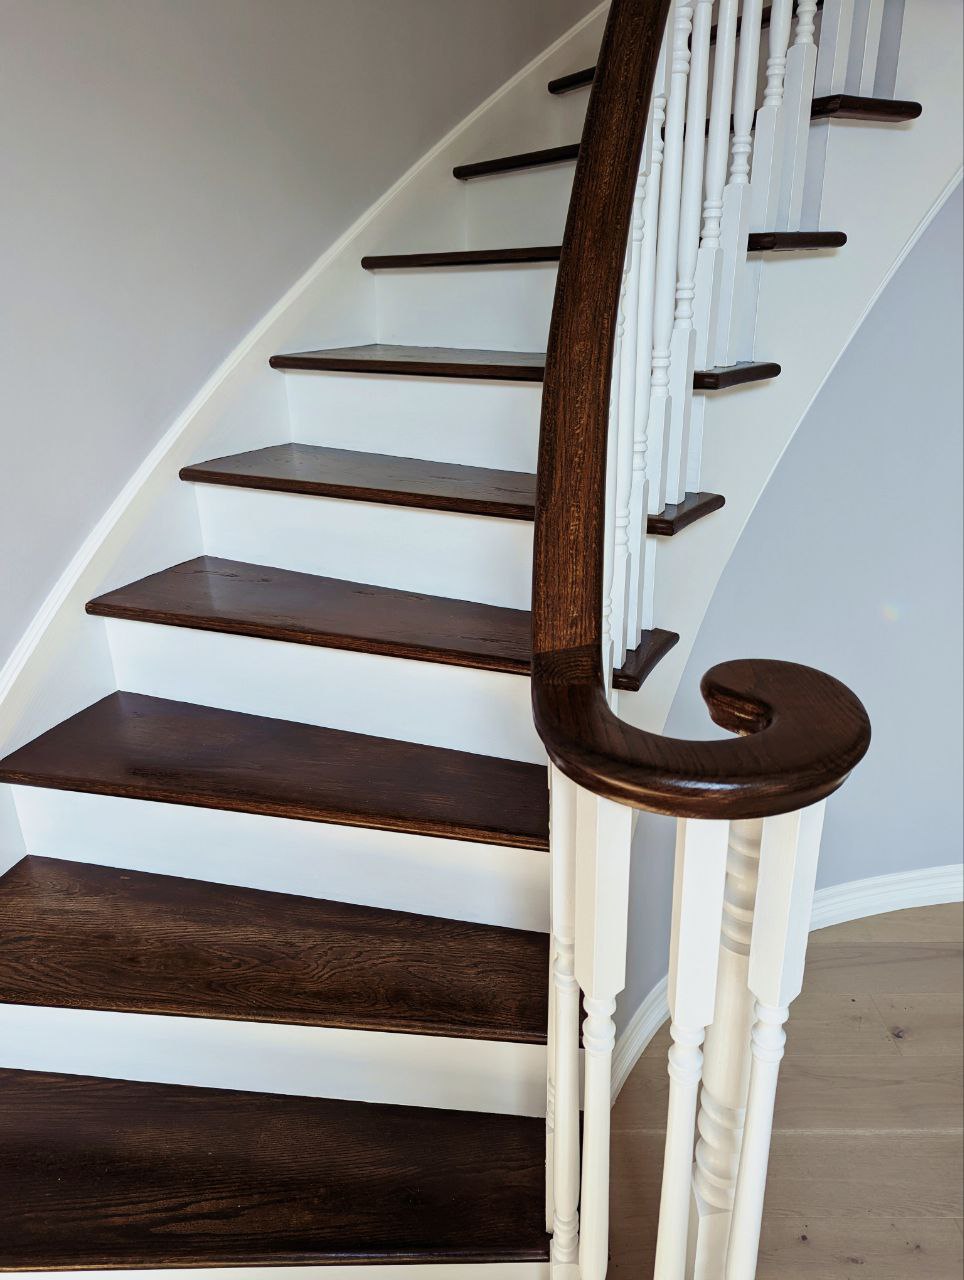 Stairs Refinishing in Oakville. Stairs, wall stringers, risers, handrails, pickets and all associated wooden areas including the landing on the second floor, filedl and caulk all gaps, Striped all varnish and stain, applied 1 coat of stain 2 coats of water base varnish, all areas except stairs and handrails painted white.